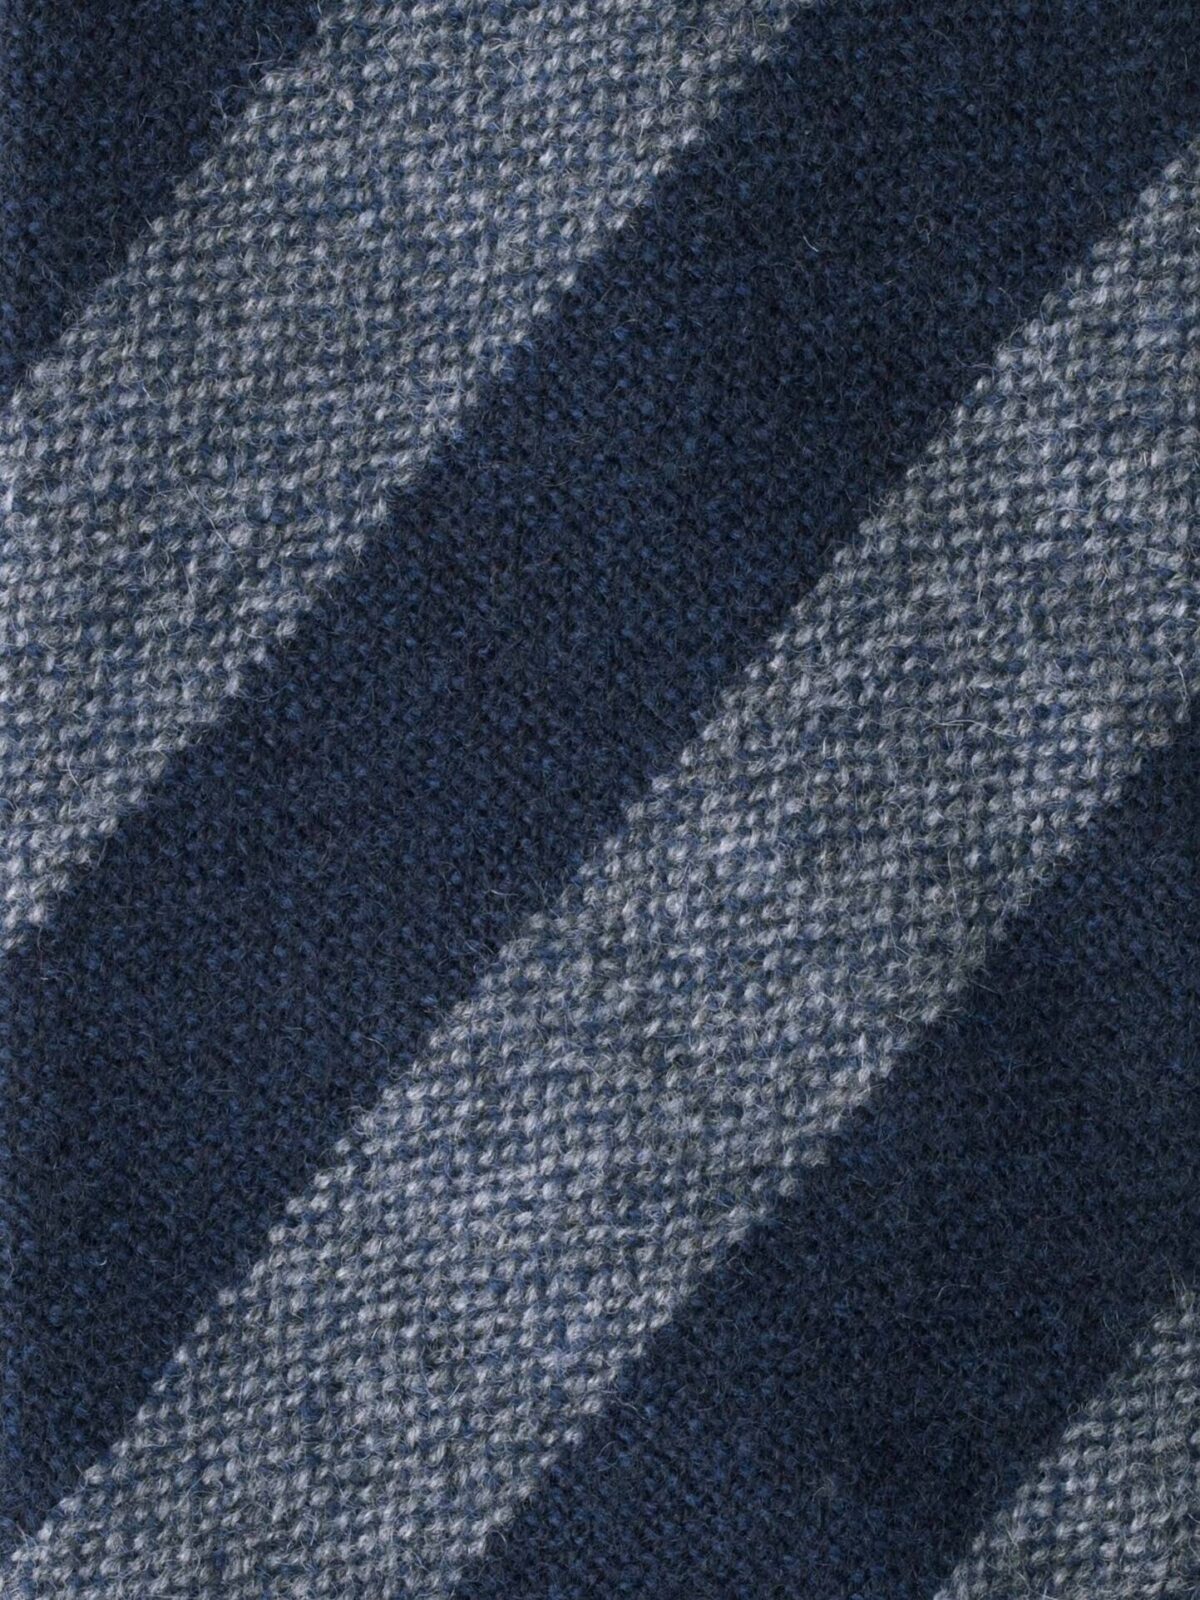 Grey and Navy Striped Cashmere Tie